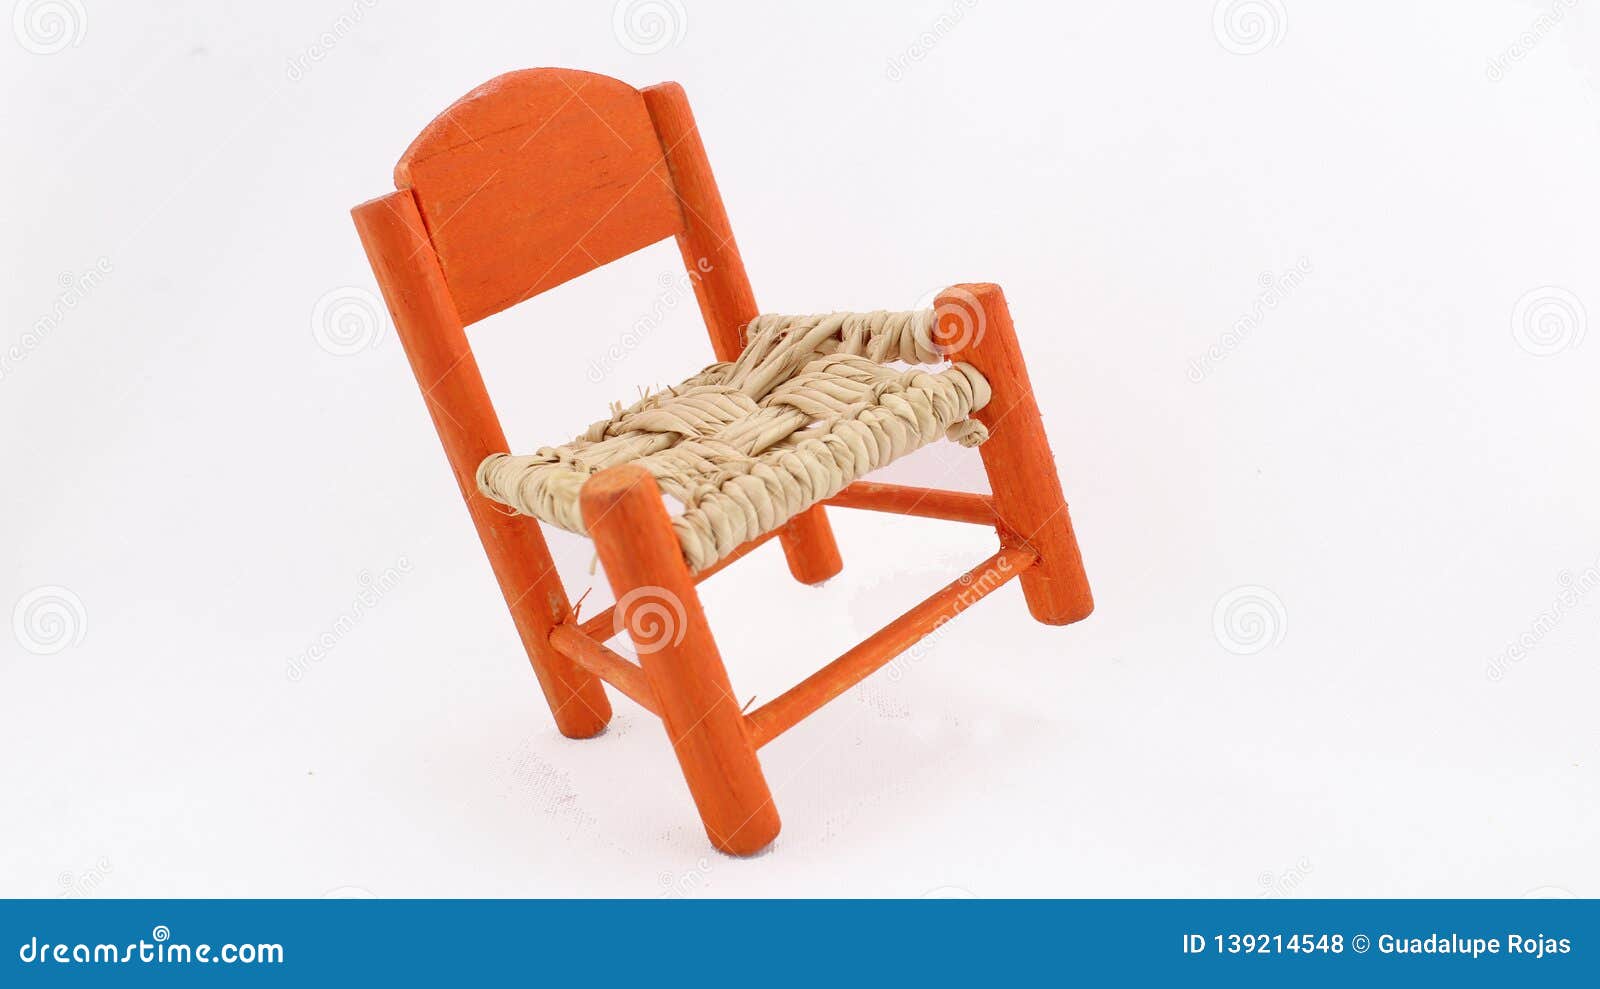 Typical Chair Of Mexican Homes Stock Photo Image Of Rustic